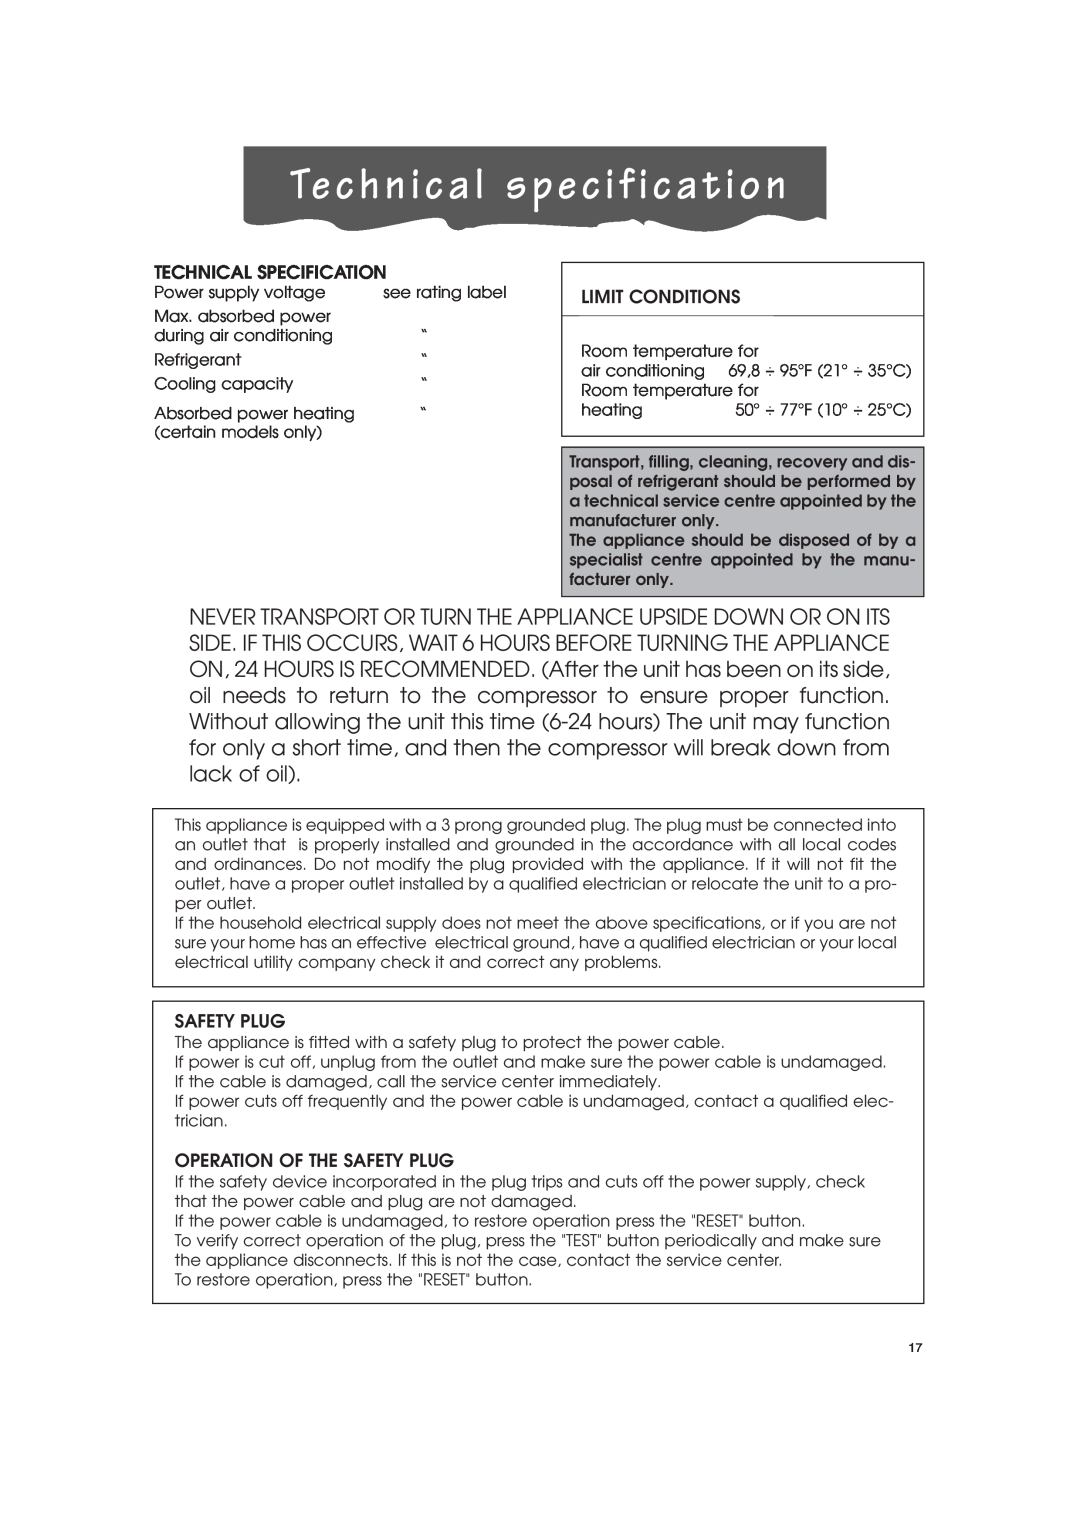 DeLonghi PAC-A130HPE instruction manual Technical specification, Technical Specification, Limit Conditions, Safety Plug 